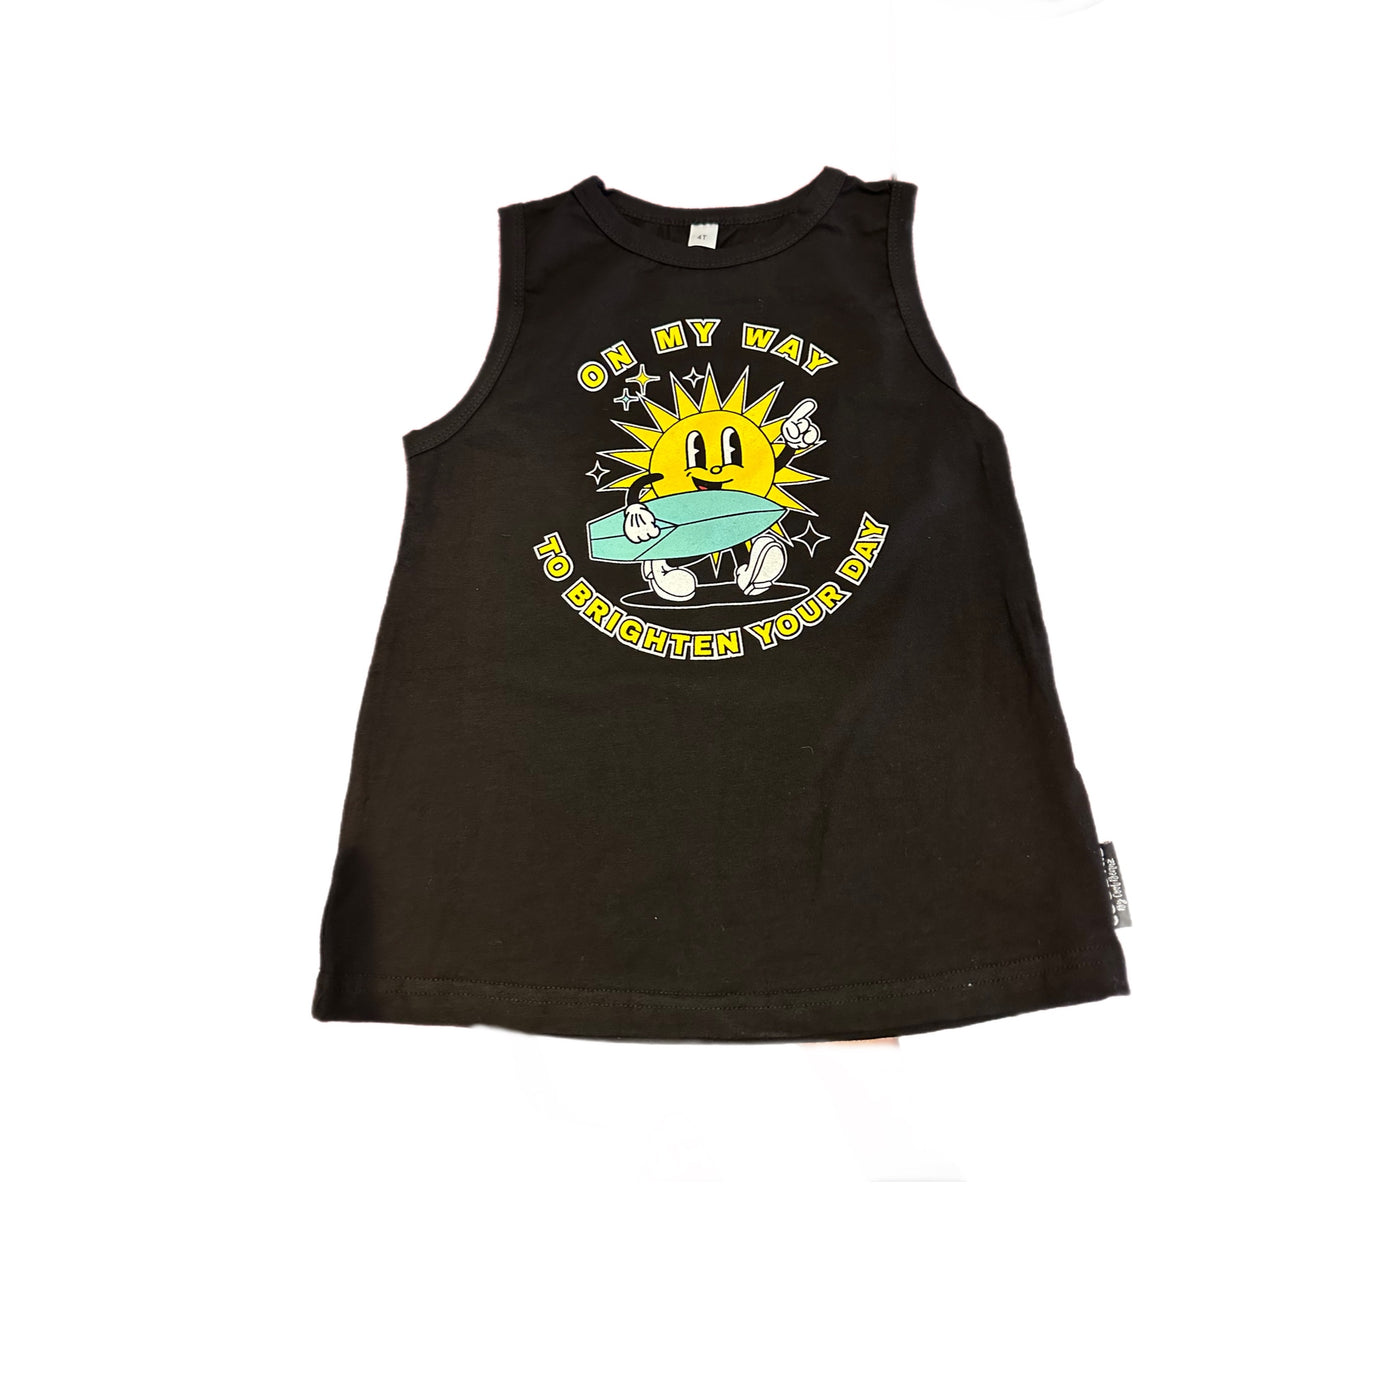 Brighten your day Muscle Tank